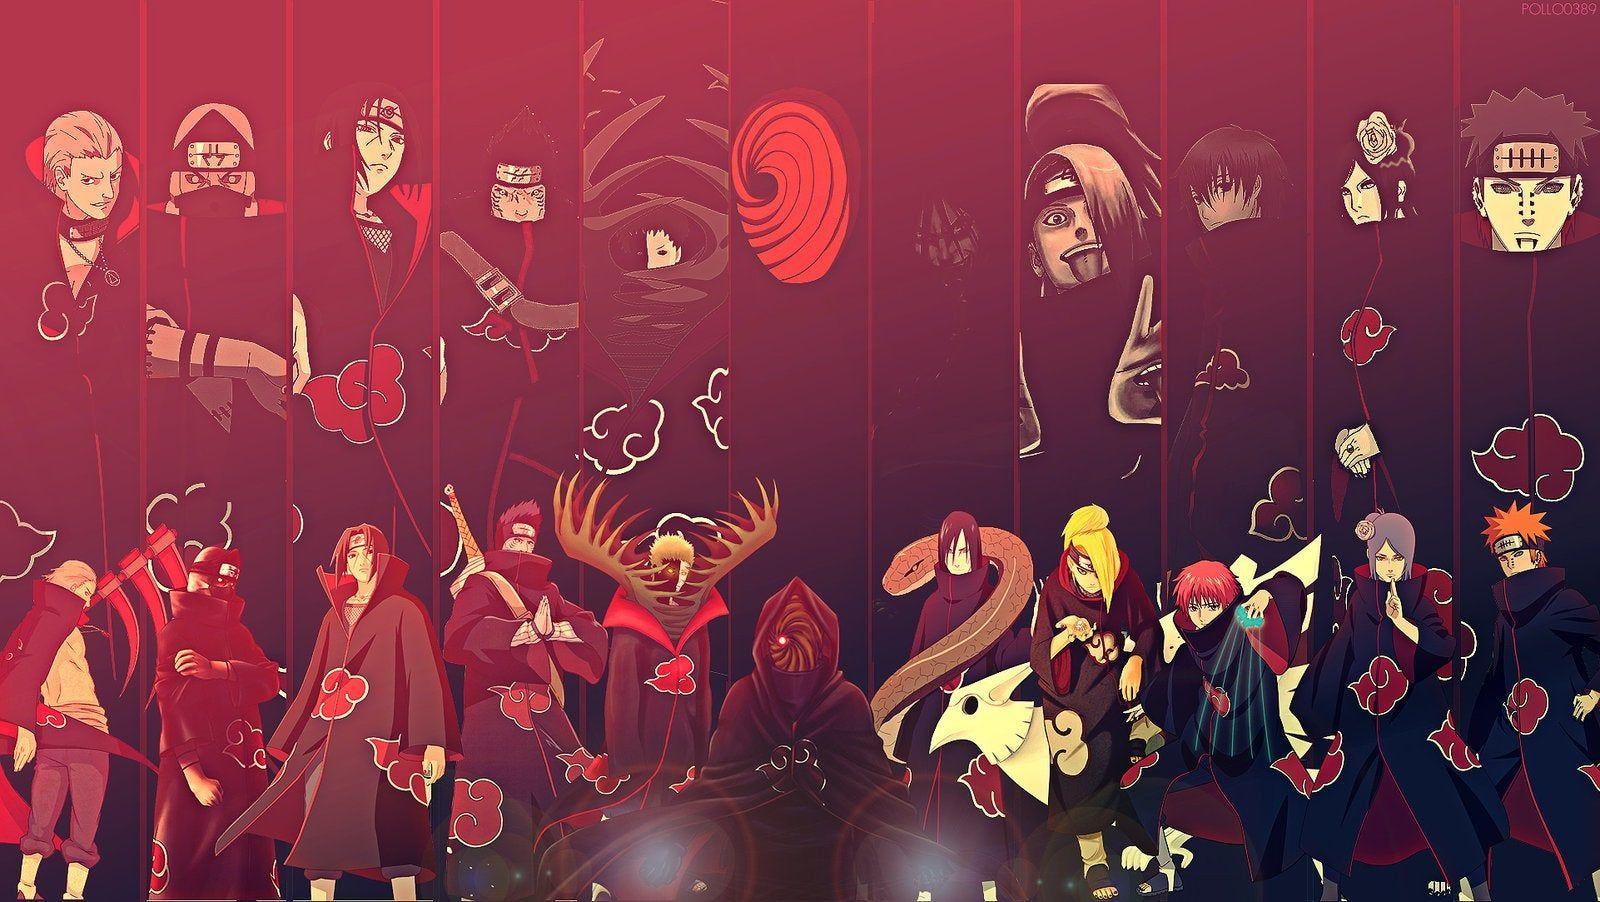 Akatsuki Wallpaper for mobile phone tablet desktop computer and other  devices HD and 4K wallpapers  Akatsuki wallpaper Papel de parede anime  Wallpaper